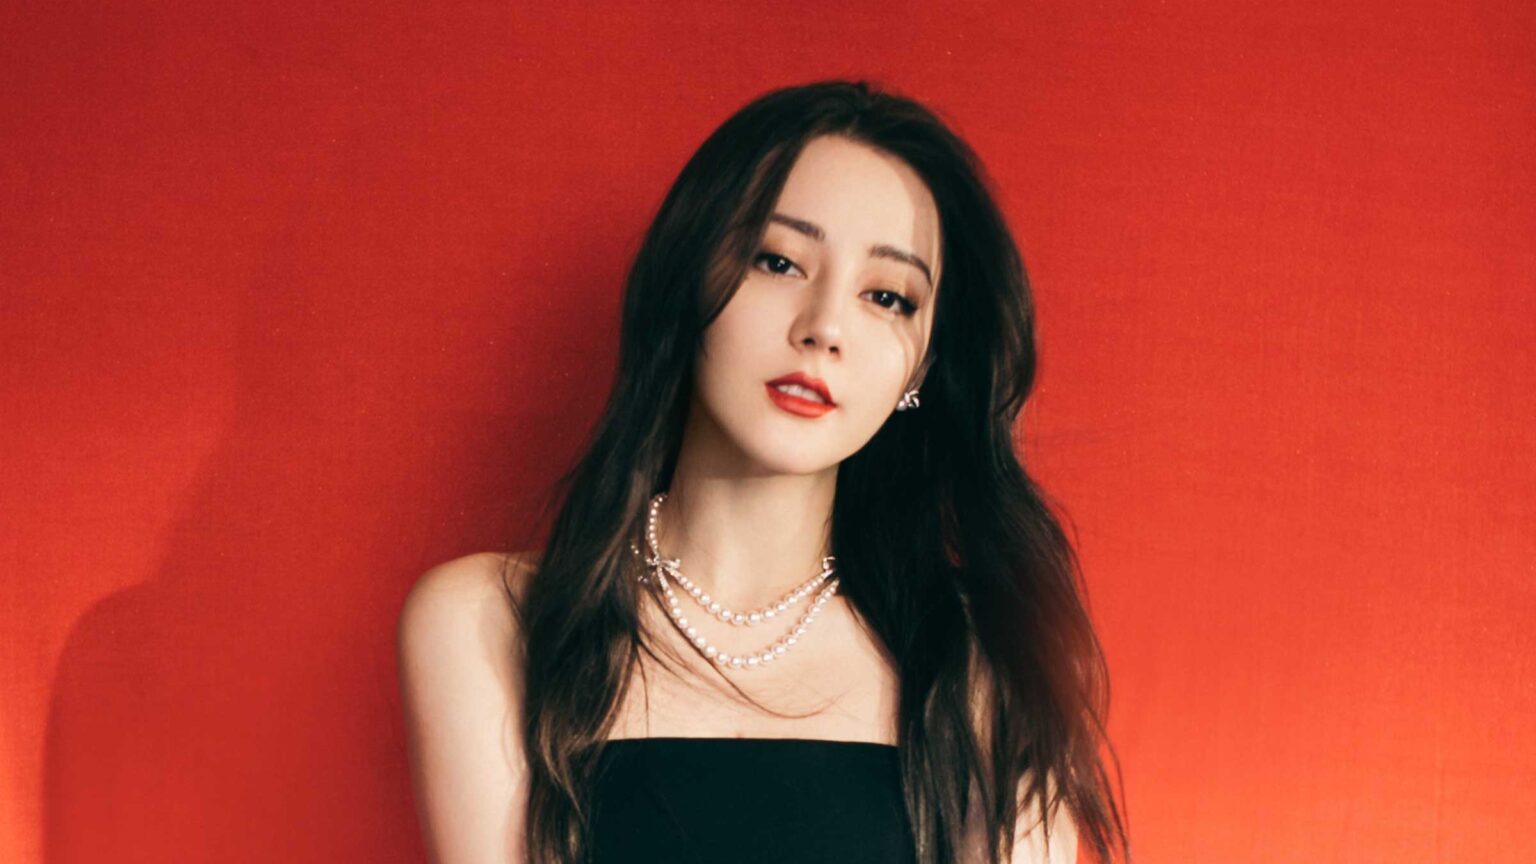 Dilraba Dilmurat, has been making waves in the c-drama sea for a while now. Here's why Dilraba Dilmurat is an actress to watch.